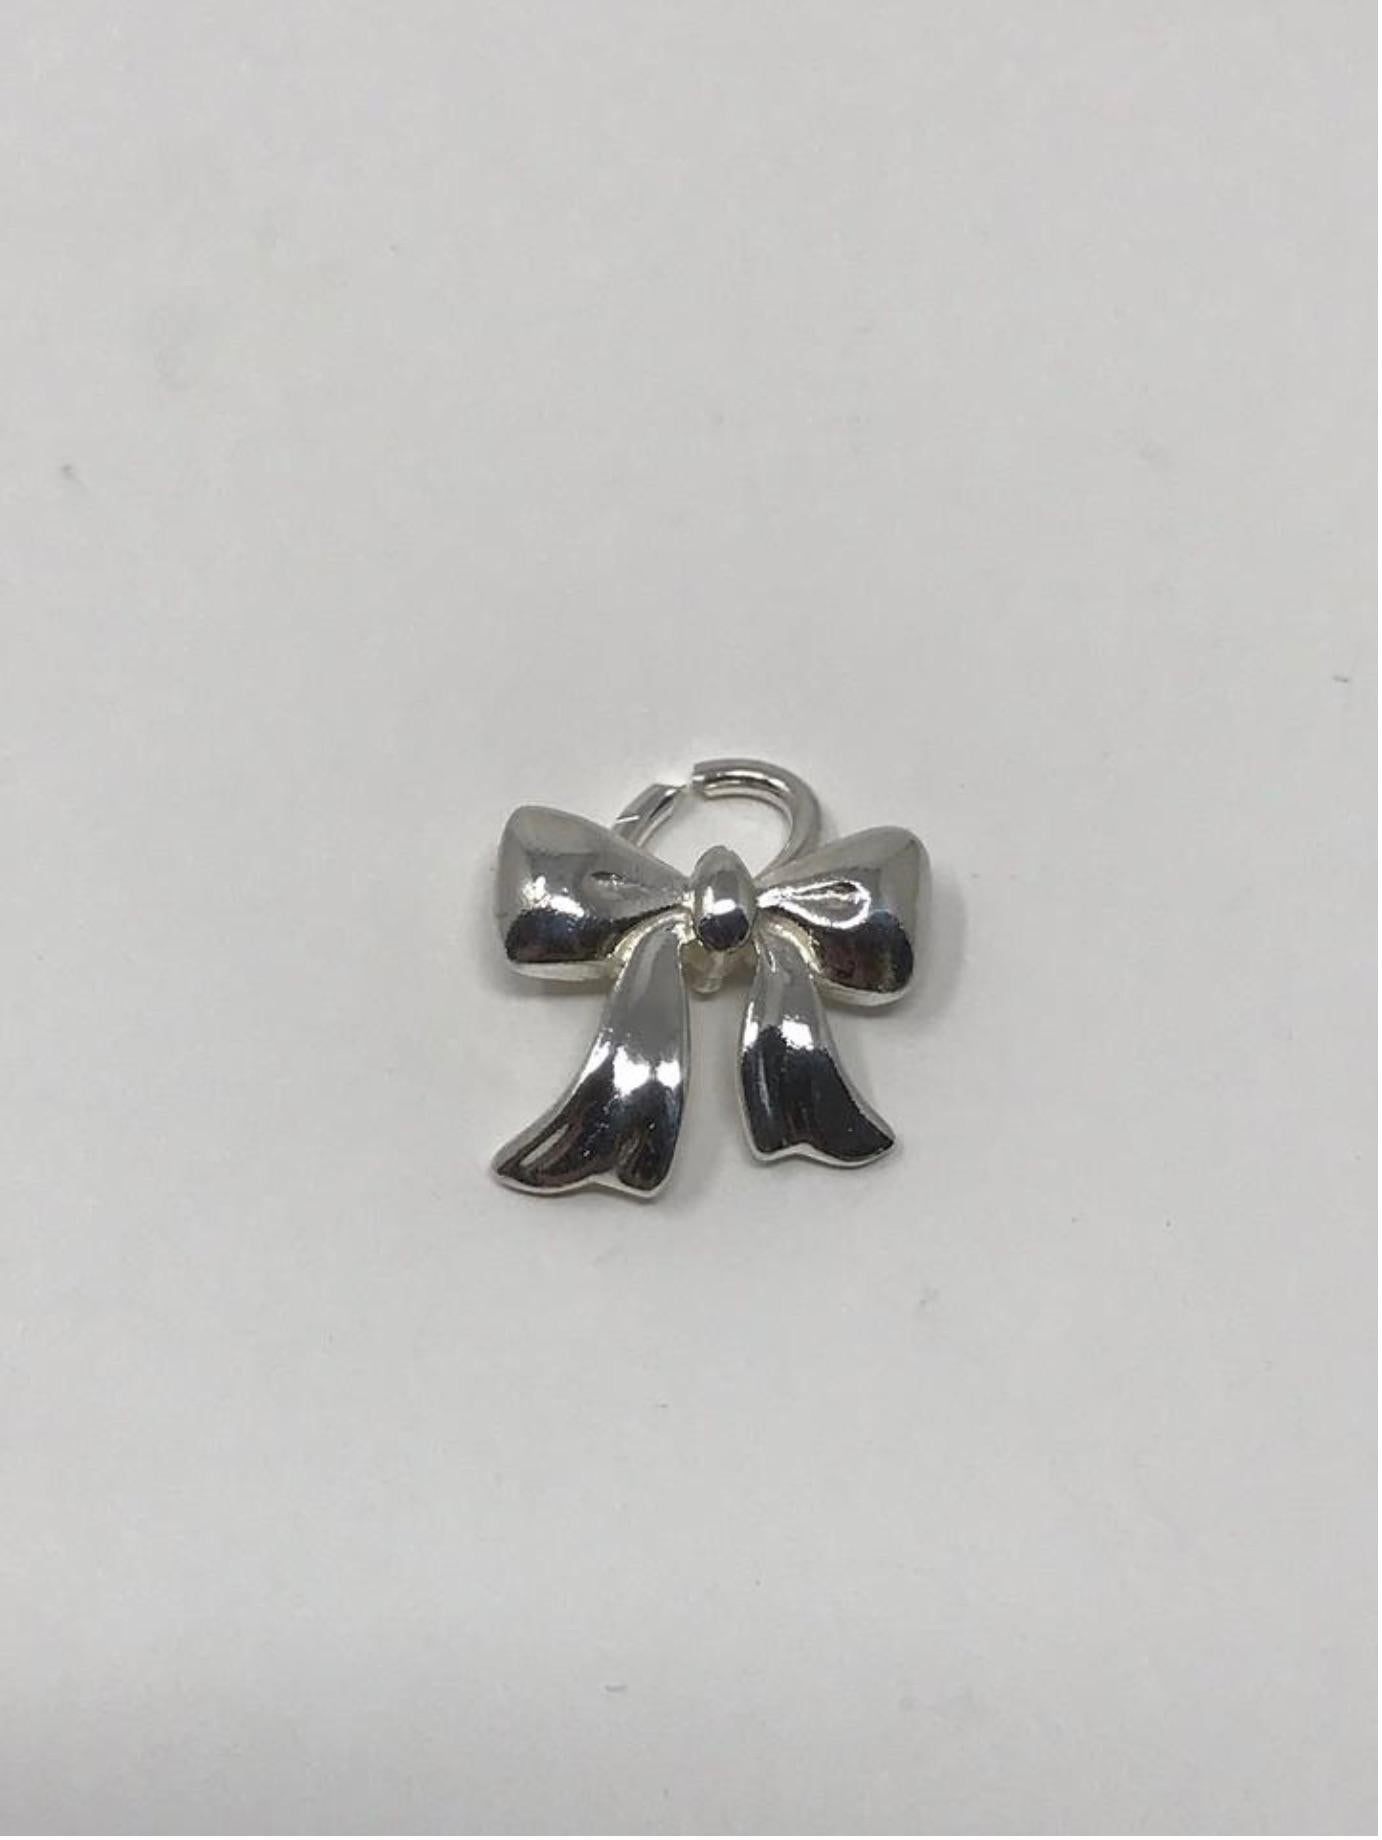 Item - Tiffany & Co. Bow Charm/Pendent

Condition - Exceptional

SKU - 1544

Original Retail Price - $275 + tax

Dimensions - 17mm x 15mmm x 7mm

Material - Silver .925

Weight - 2 oz

Comes with - Dust Bag

Available in Store - No